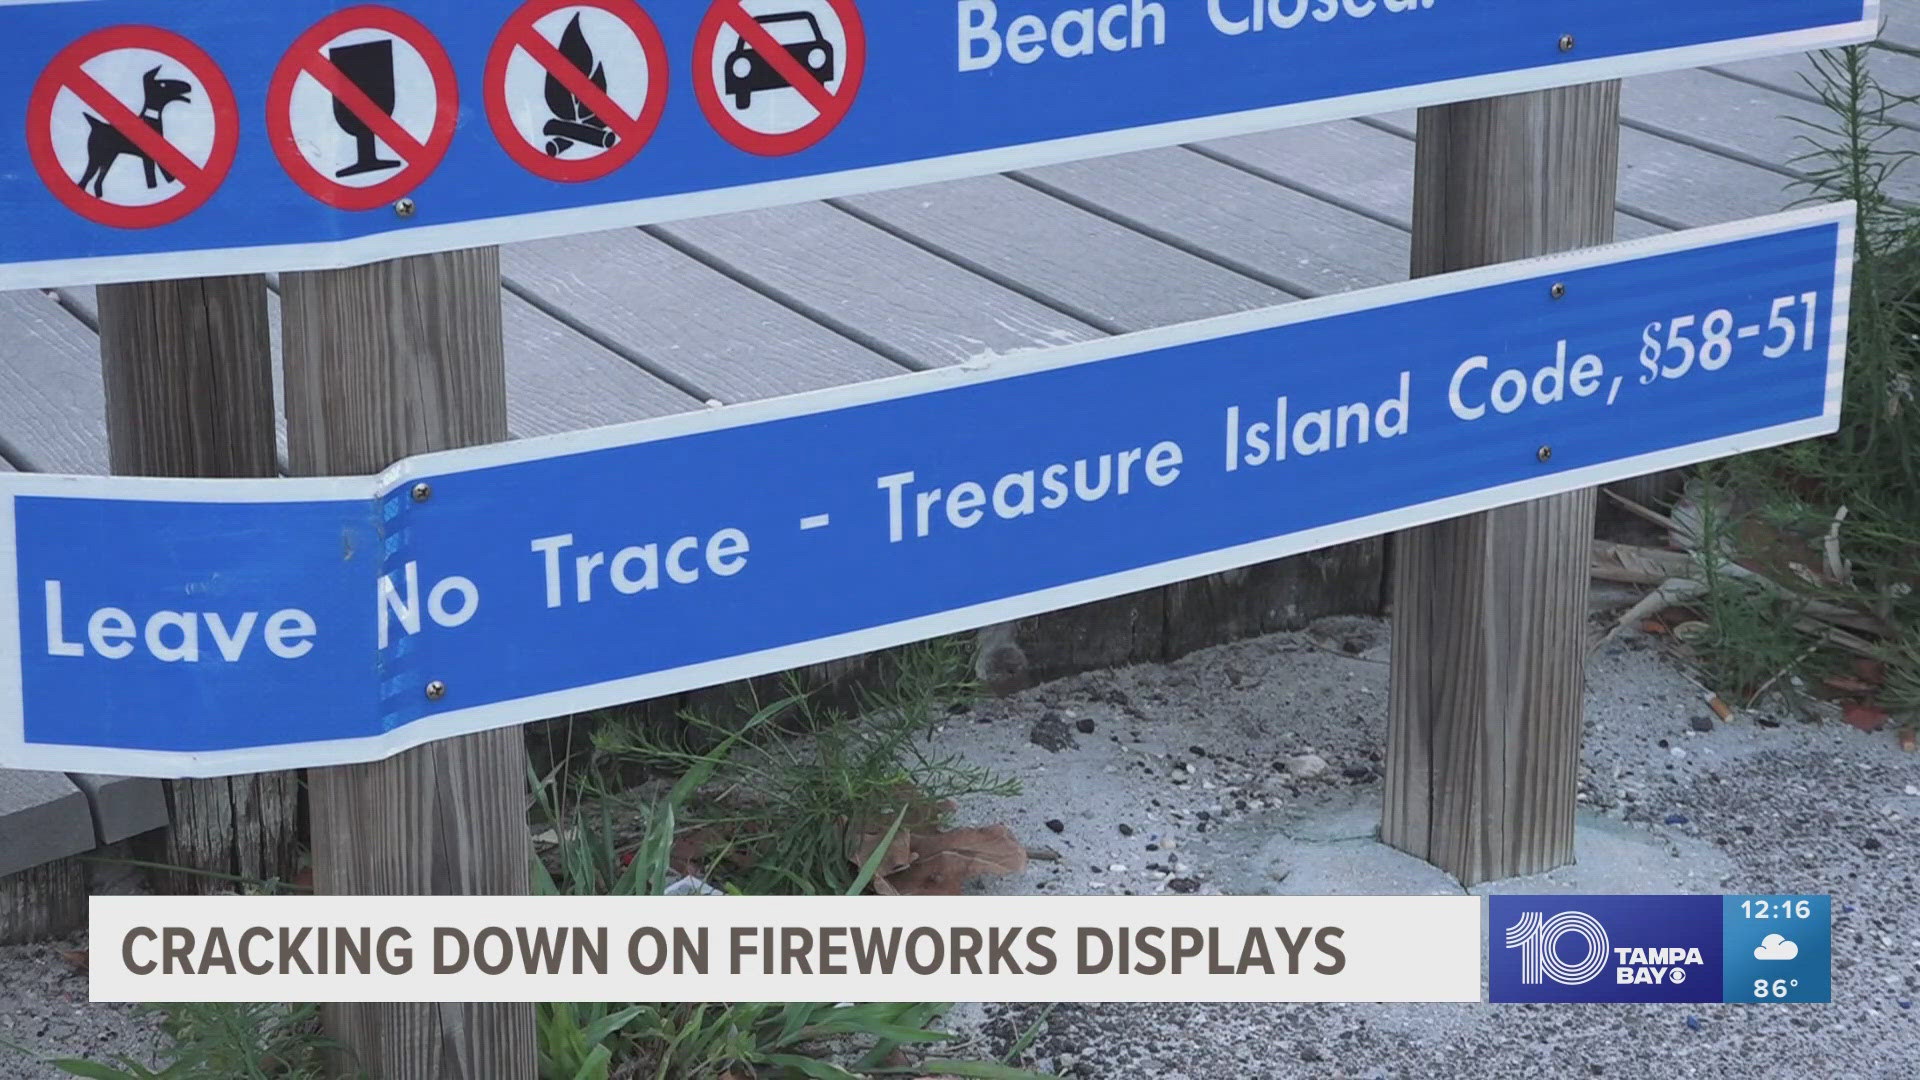 The beach advises visitors to leave personal fireworks at home and enjoy their new large display of professionally done fireworks.